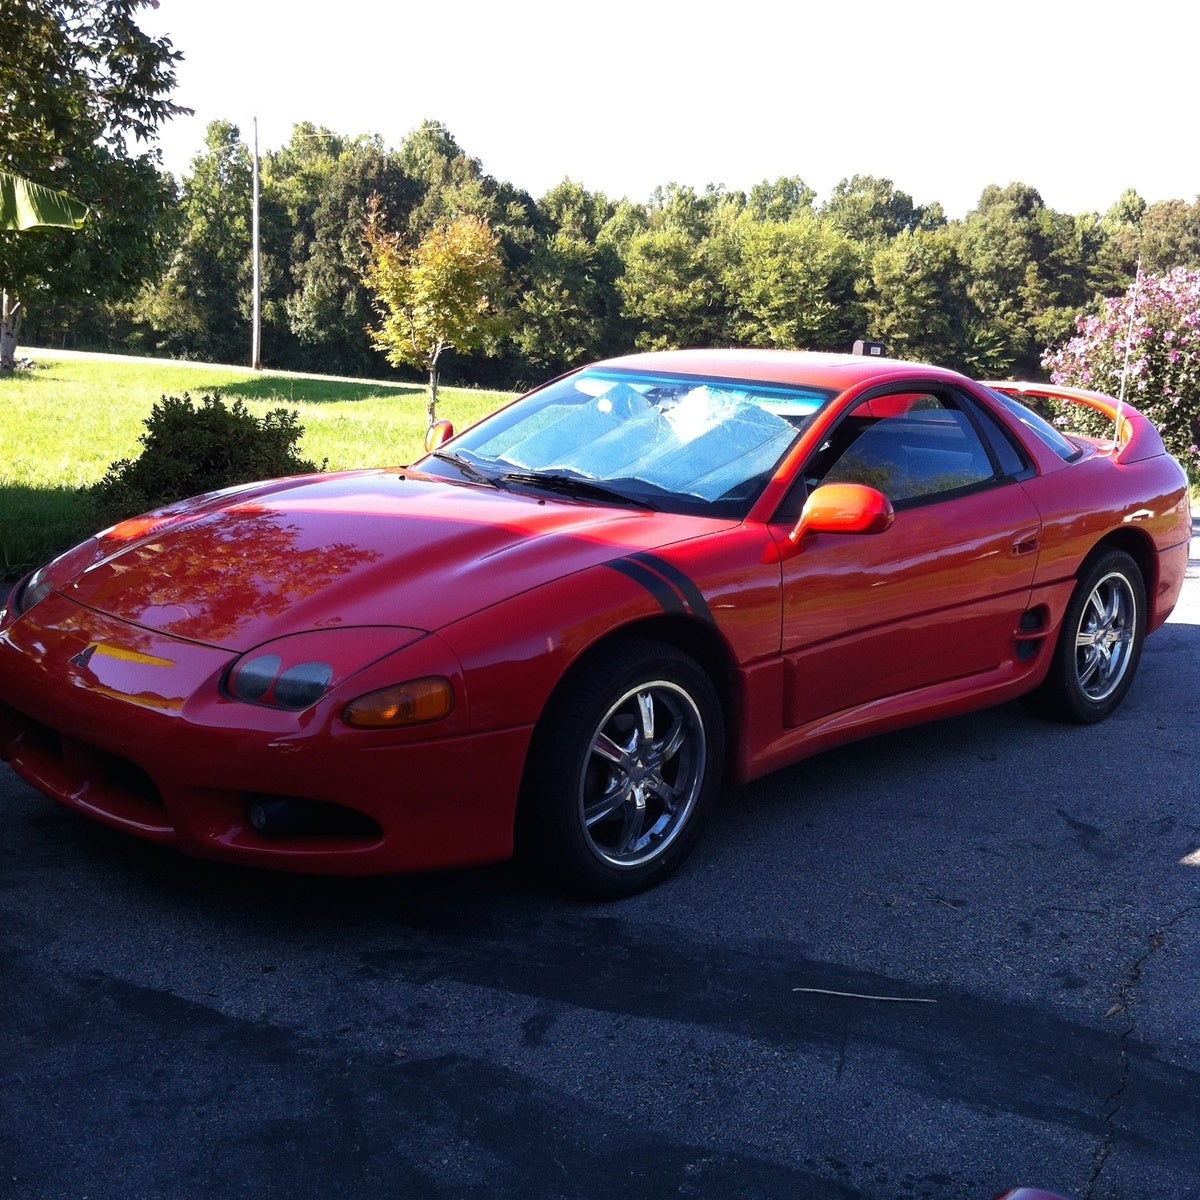 Mitsubishi 3000GT Questions - I have an 1998 3000GT, and I noticed ...